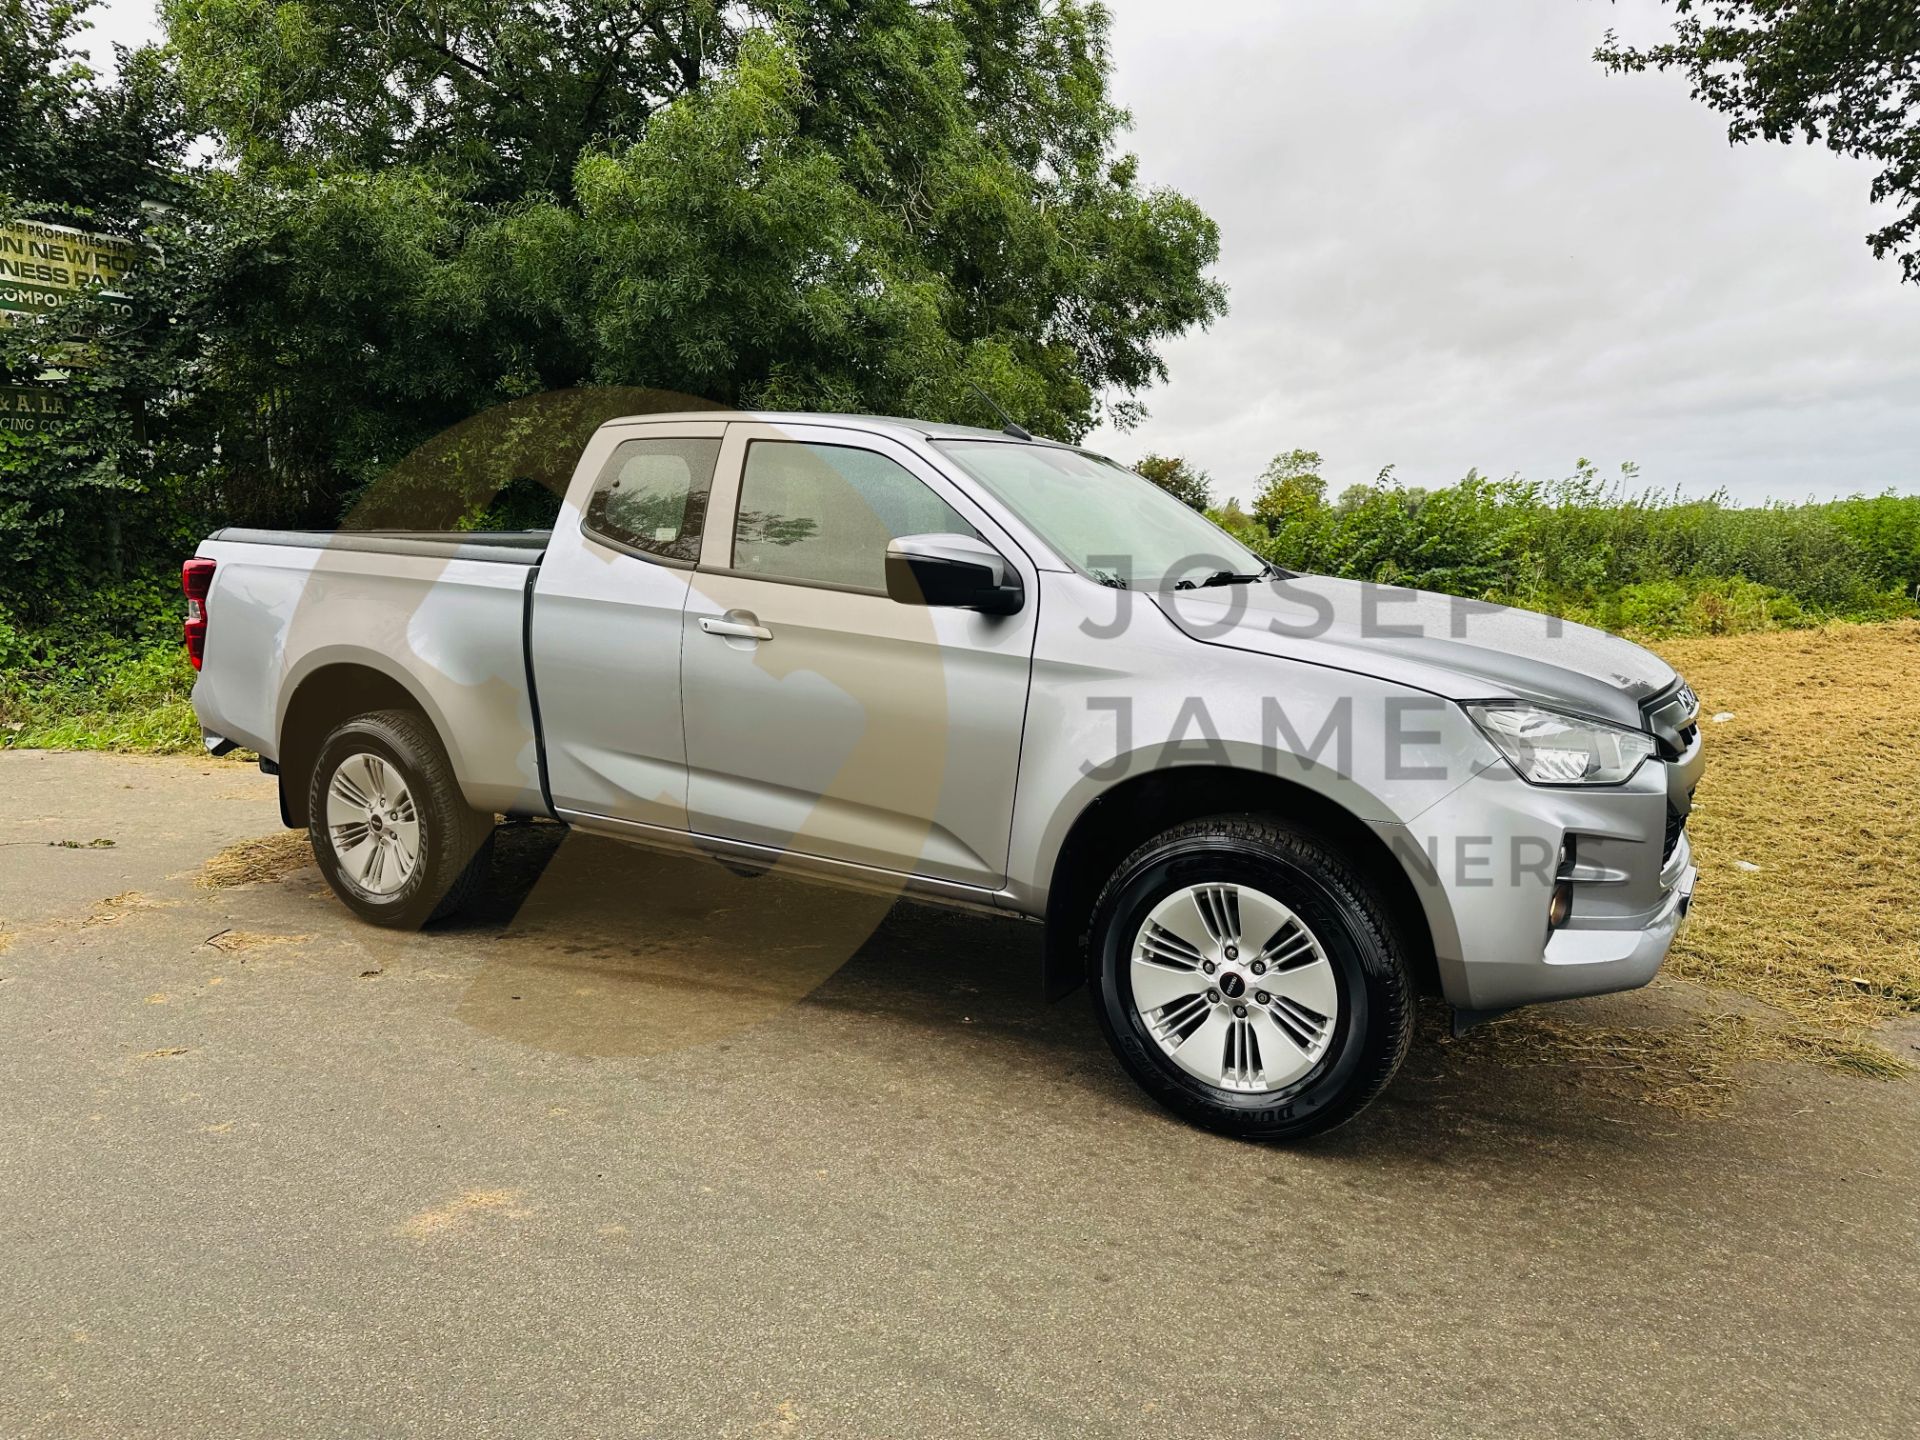 ISUZU D-MAX *SUPER CAB PICK-UP* (2021 - FACELIFT MODEL) 1.9 TURBO DIESEL 'EURO 6' *1 OWNER FROM NEW*